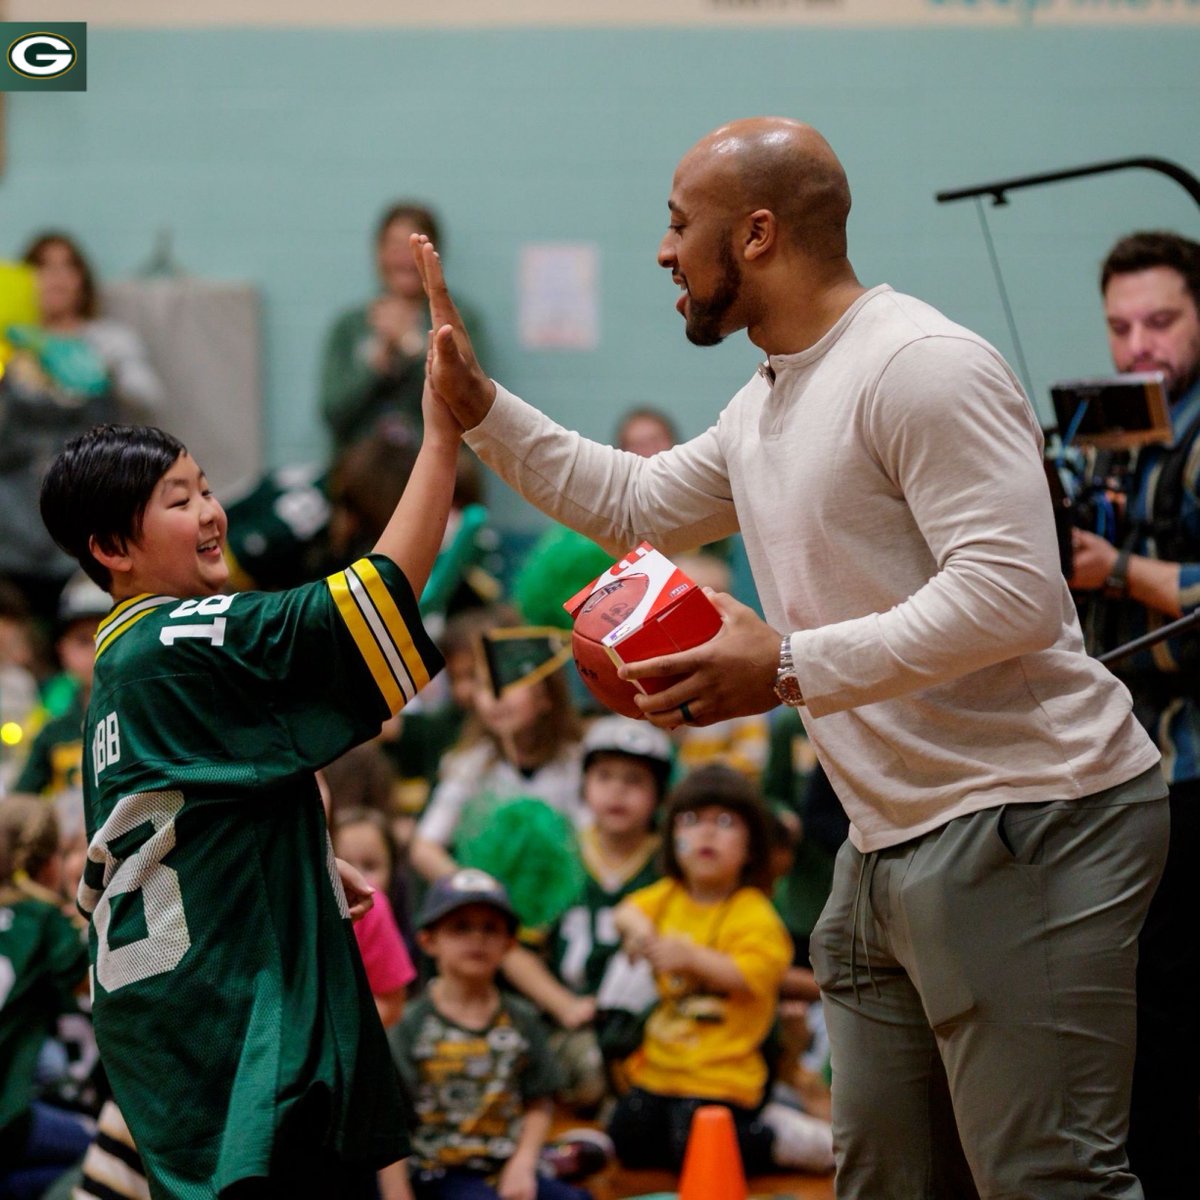 The #Packers & @UScellular congratulated King Elementary last week, the winner of a $20K technology makeover, through the Leap for Learning program! They even had a surprise appearance from RB AJ Dillion to celebrate. 🤩

Thanks to all who applied & to UScellular who made this… https://t.co/Ti5MQiG8Fe 